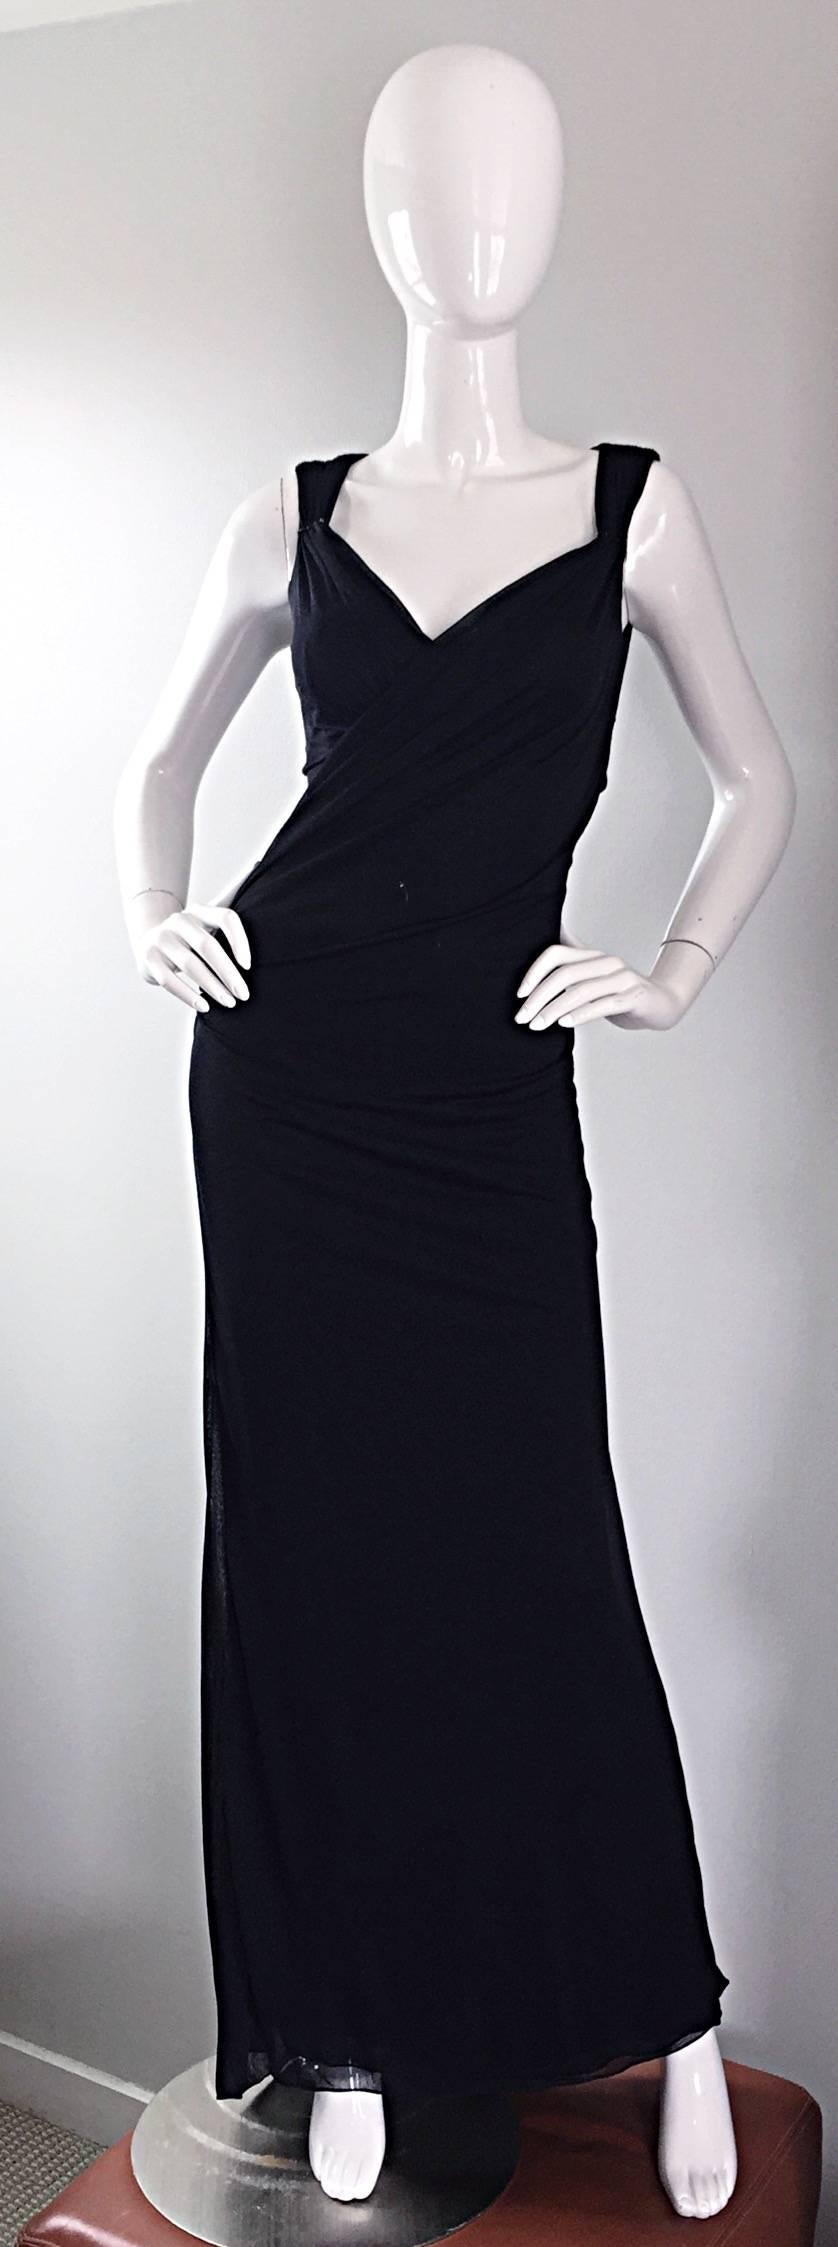 Sexy 1990s / 90s vintage RICHARD TYLER COUTURE black jersey evening gown, with flattering cut - out back. Hand-sewn black glass beads at shoulders. Ruching at front bodice is very slimming, and reveals just the right amount of cleavage. Exudes a